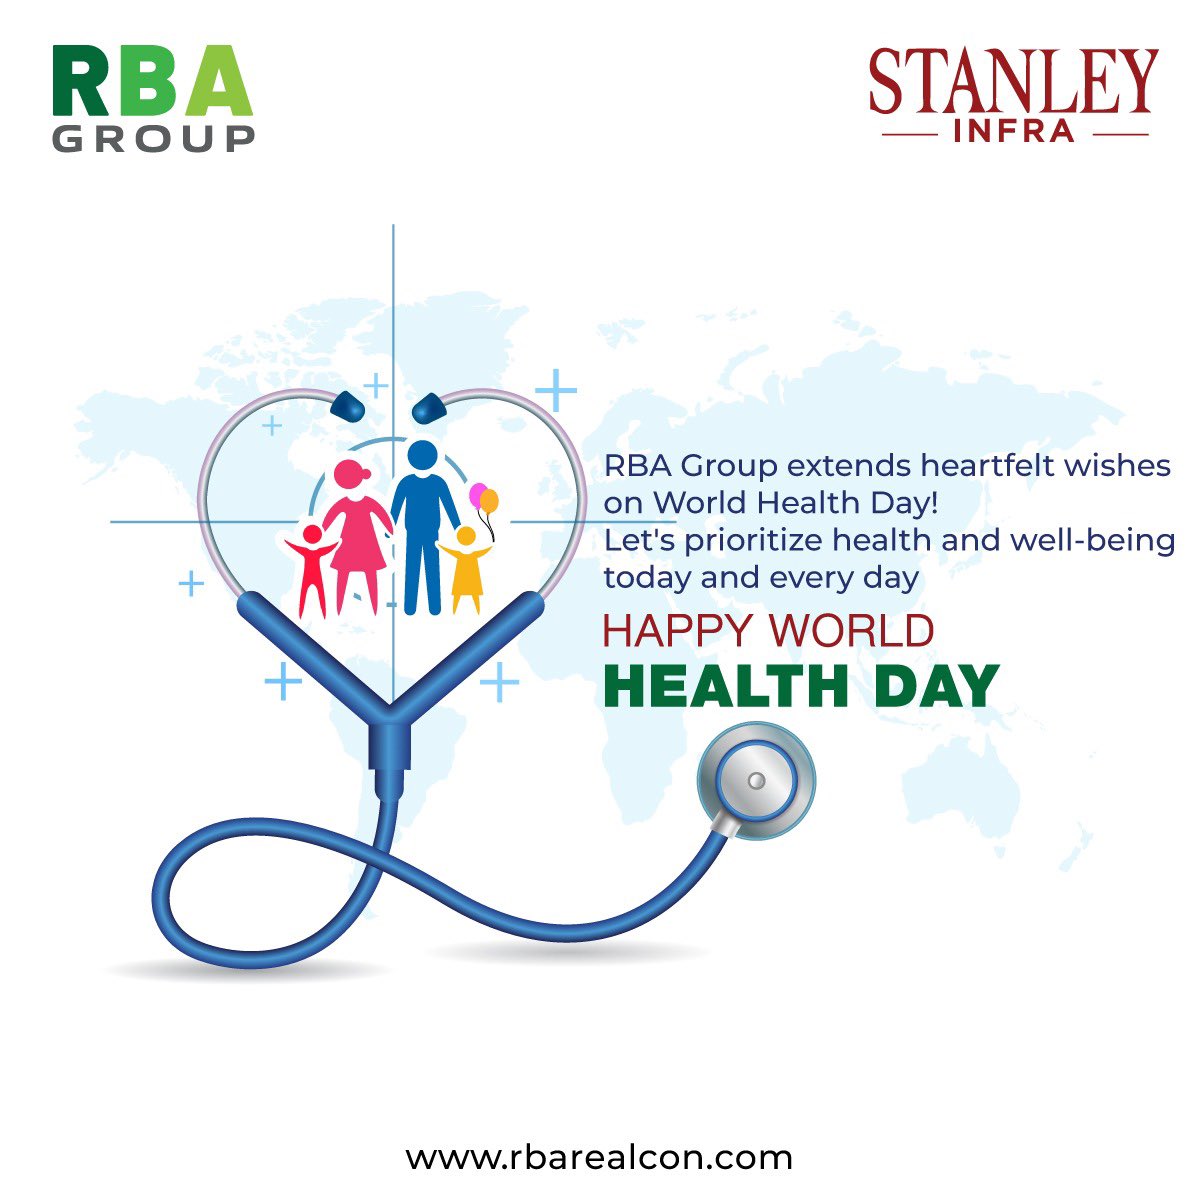 On World Health Day, let's celebrate vitality in every step! Prioritize your well-being, and let's walk together towards a happier, healthier world.

#RBAgroup #Stanleyinfra #StepIntoHealth #WorldHealthDay2024 #WalkTowardsWellness #HealthySteps #UpliftingWellness